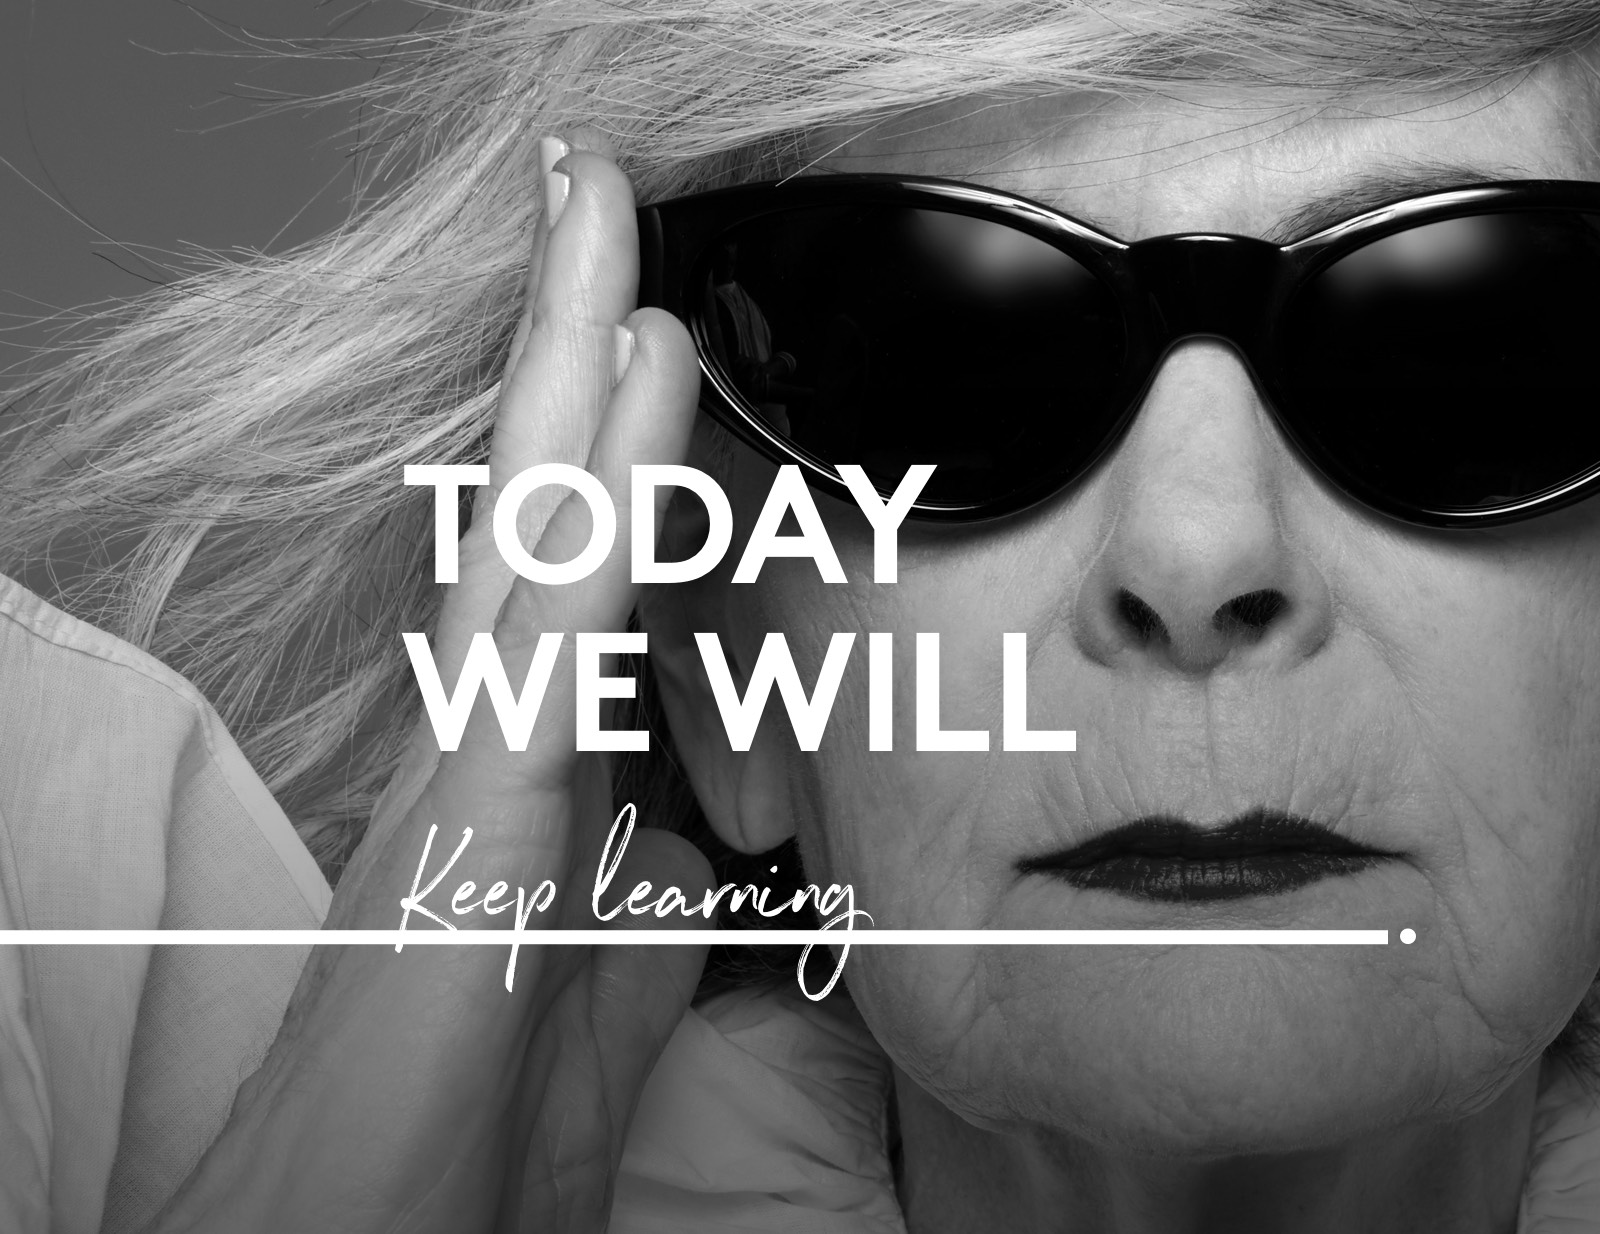 Today We will keep learning.